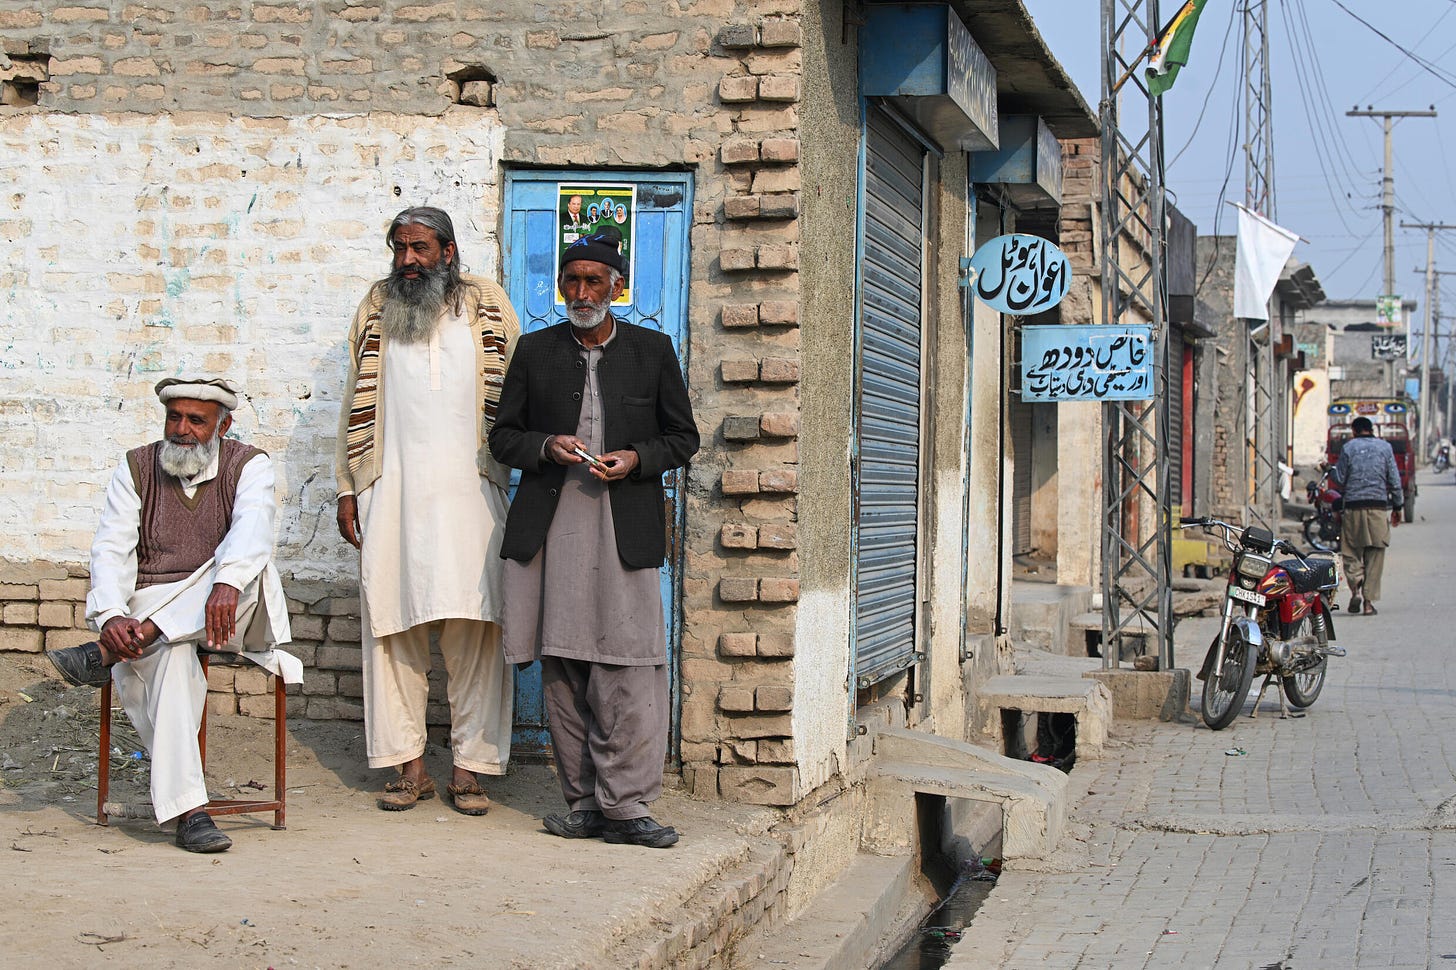 Although voting is a constitutional right for all adults in Pakistan, some rural areas in the socially conservative country are still ruled by a patriarchal system of male village elders who wield significant influence in their communities